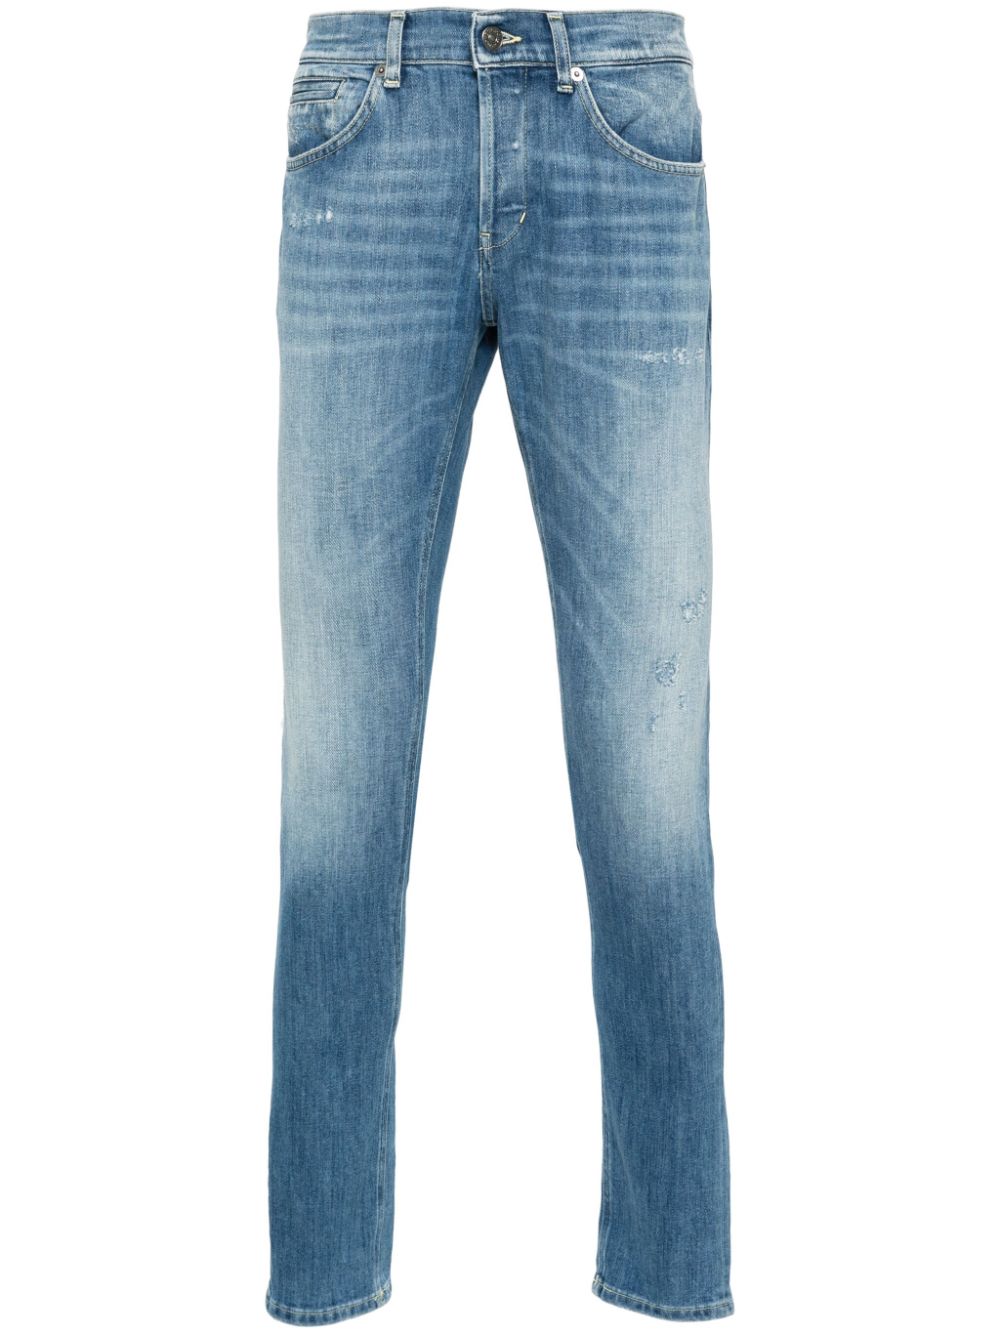 George skinny fit stretch cotton jeans